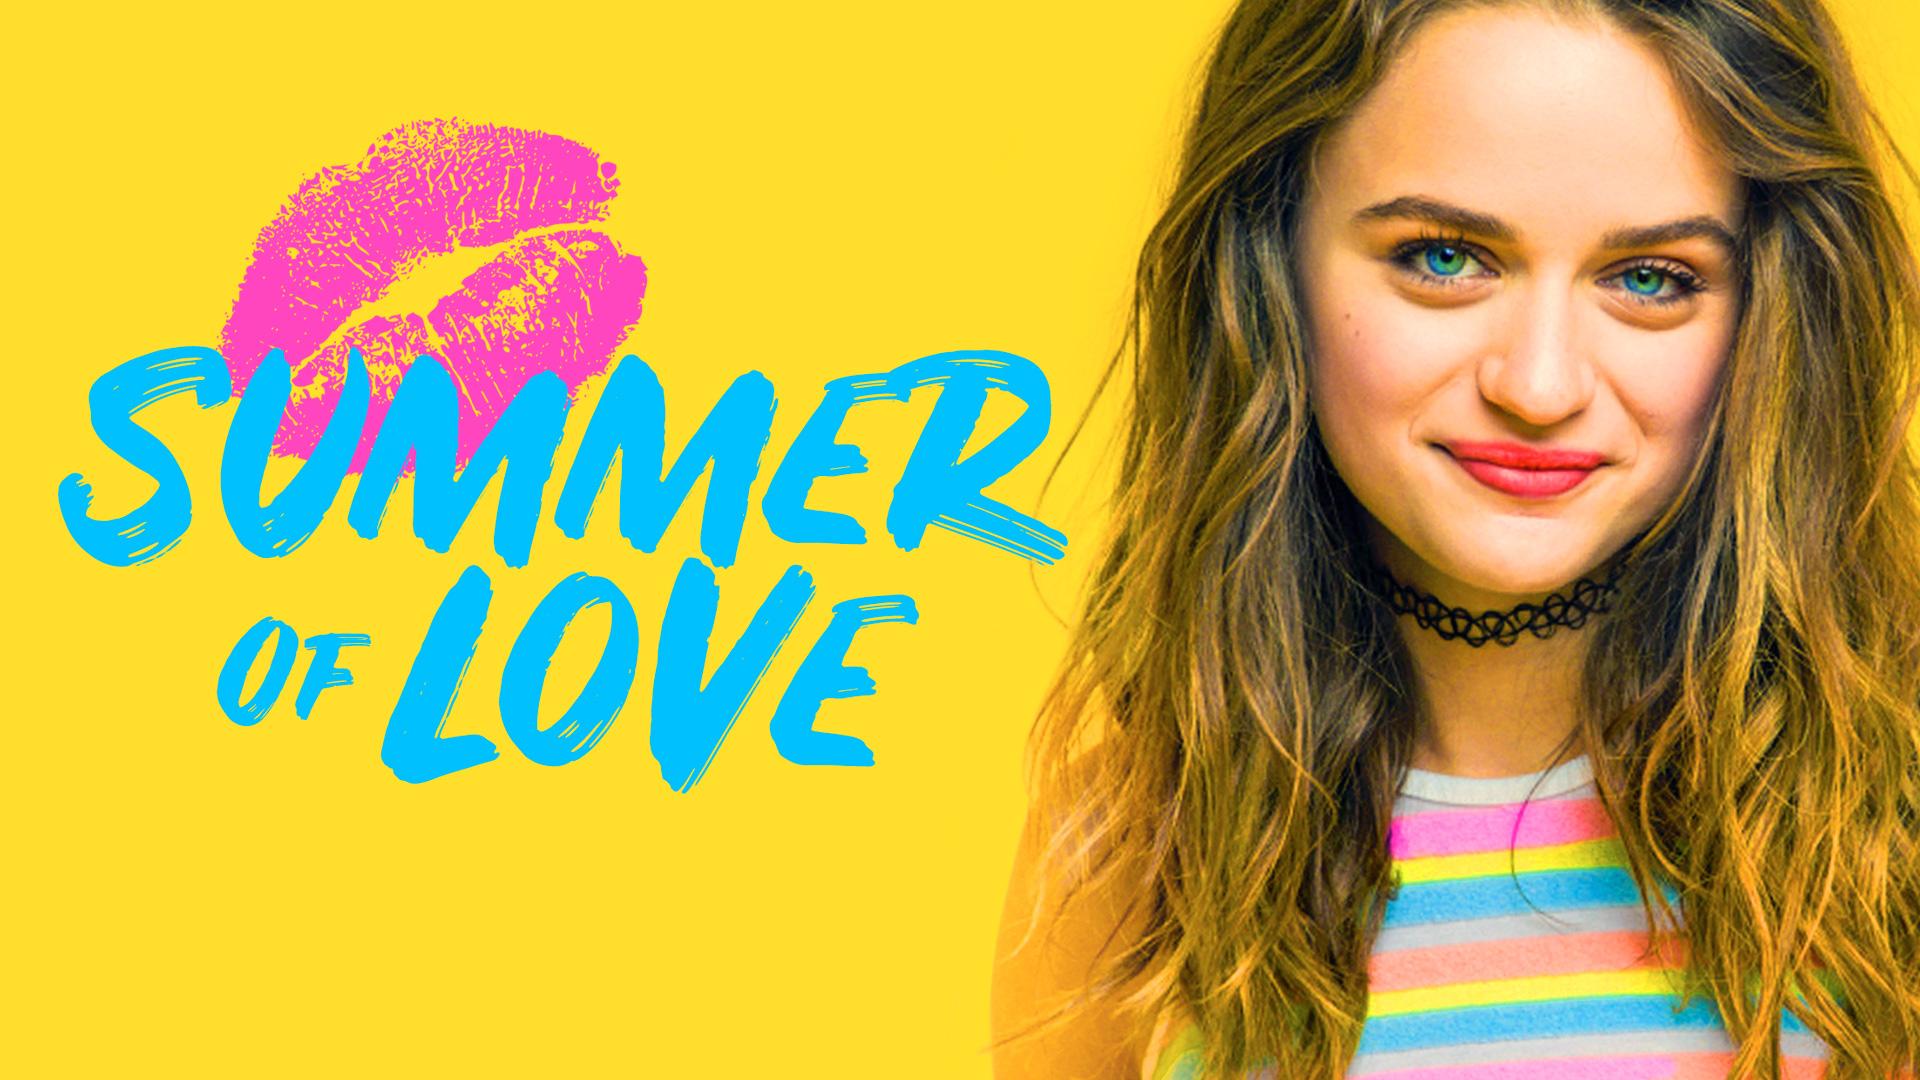 Joey King Poster 2020 Wallpapers